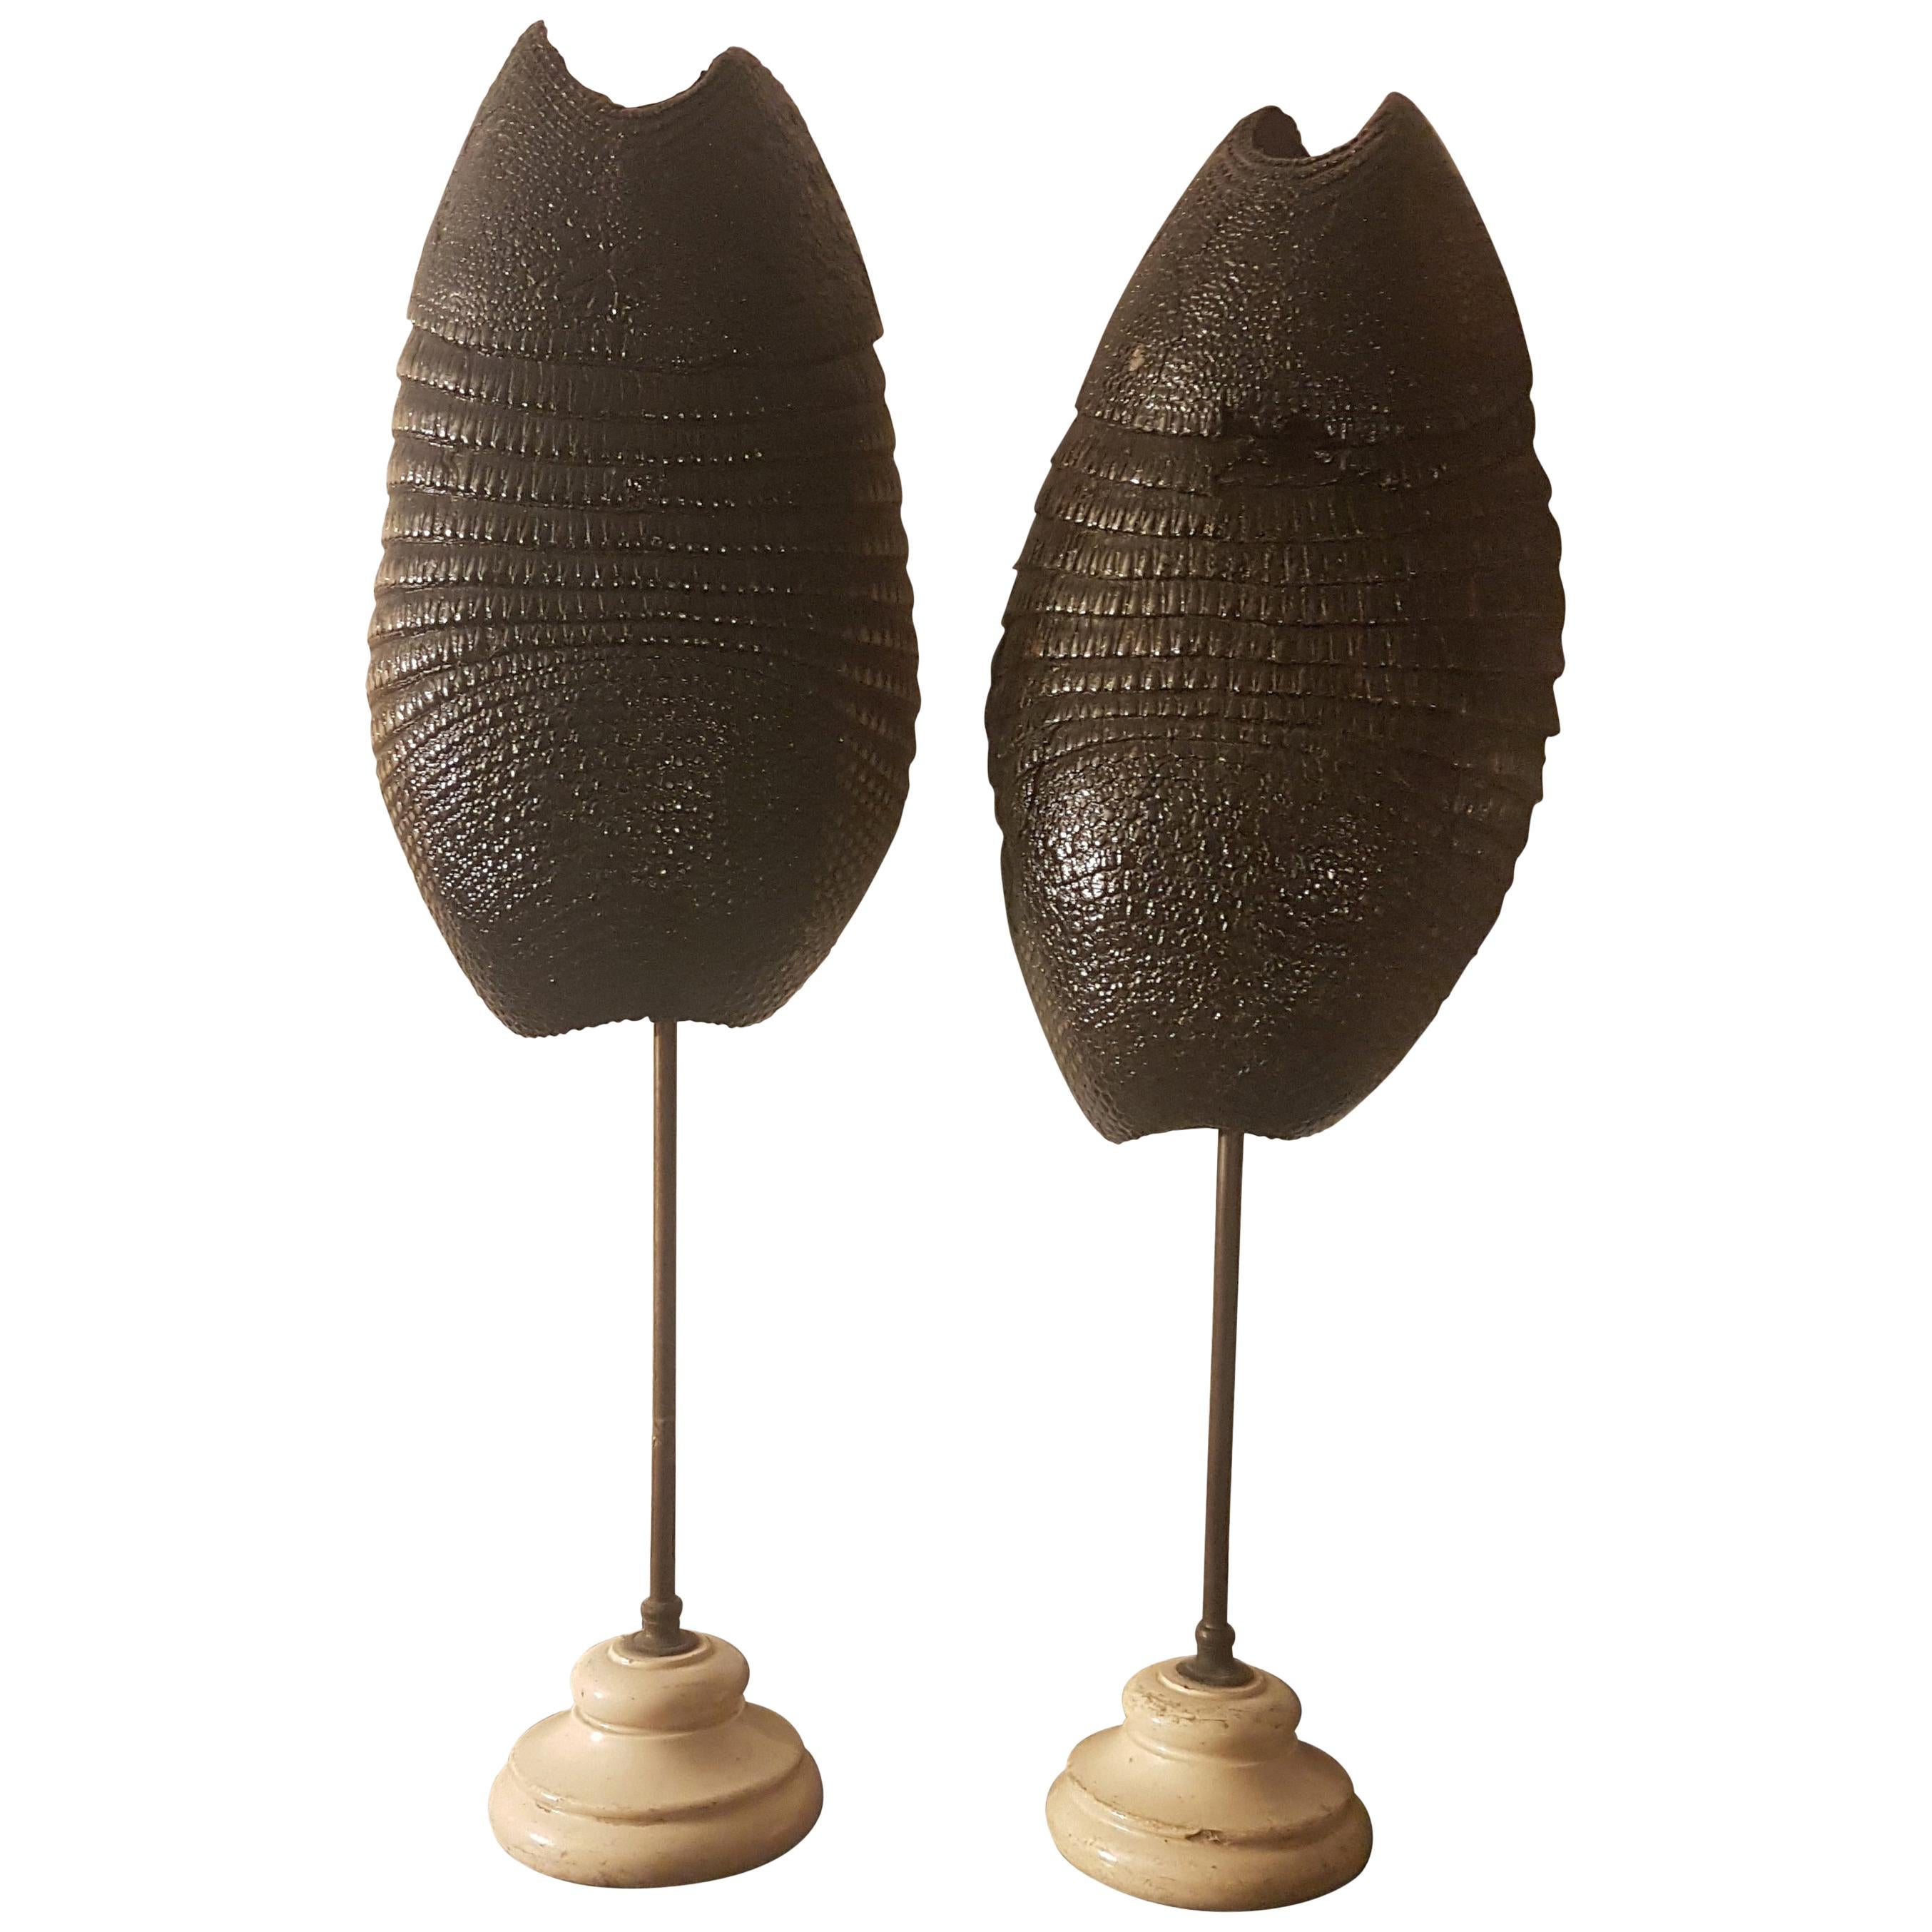 Pair of Late 19th Century Armadillo Shells on Stands